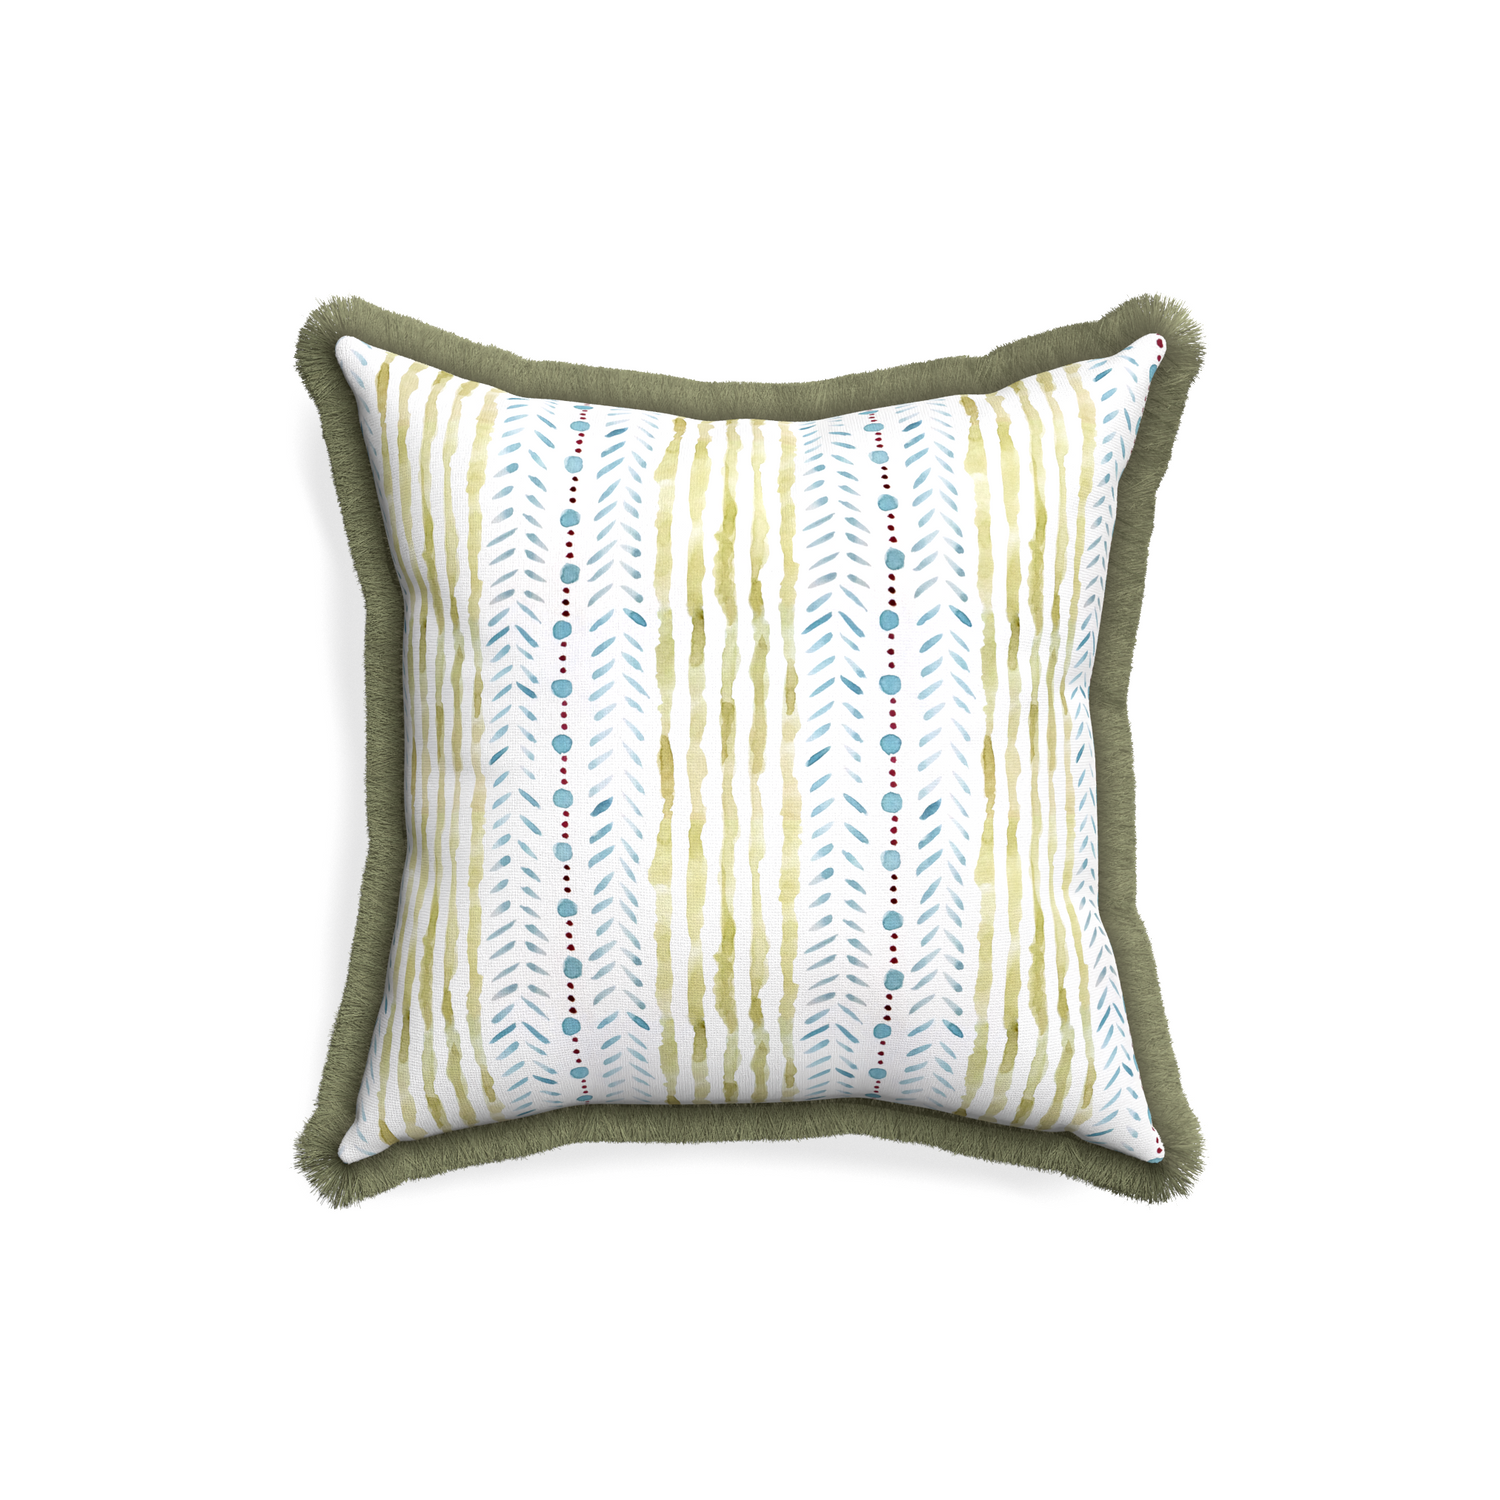 18-square julia custom blue & green stripedpillow with sage fringe on white background